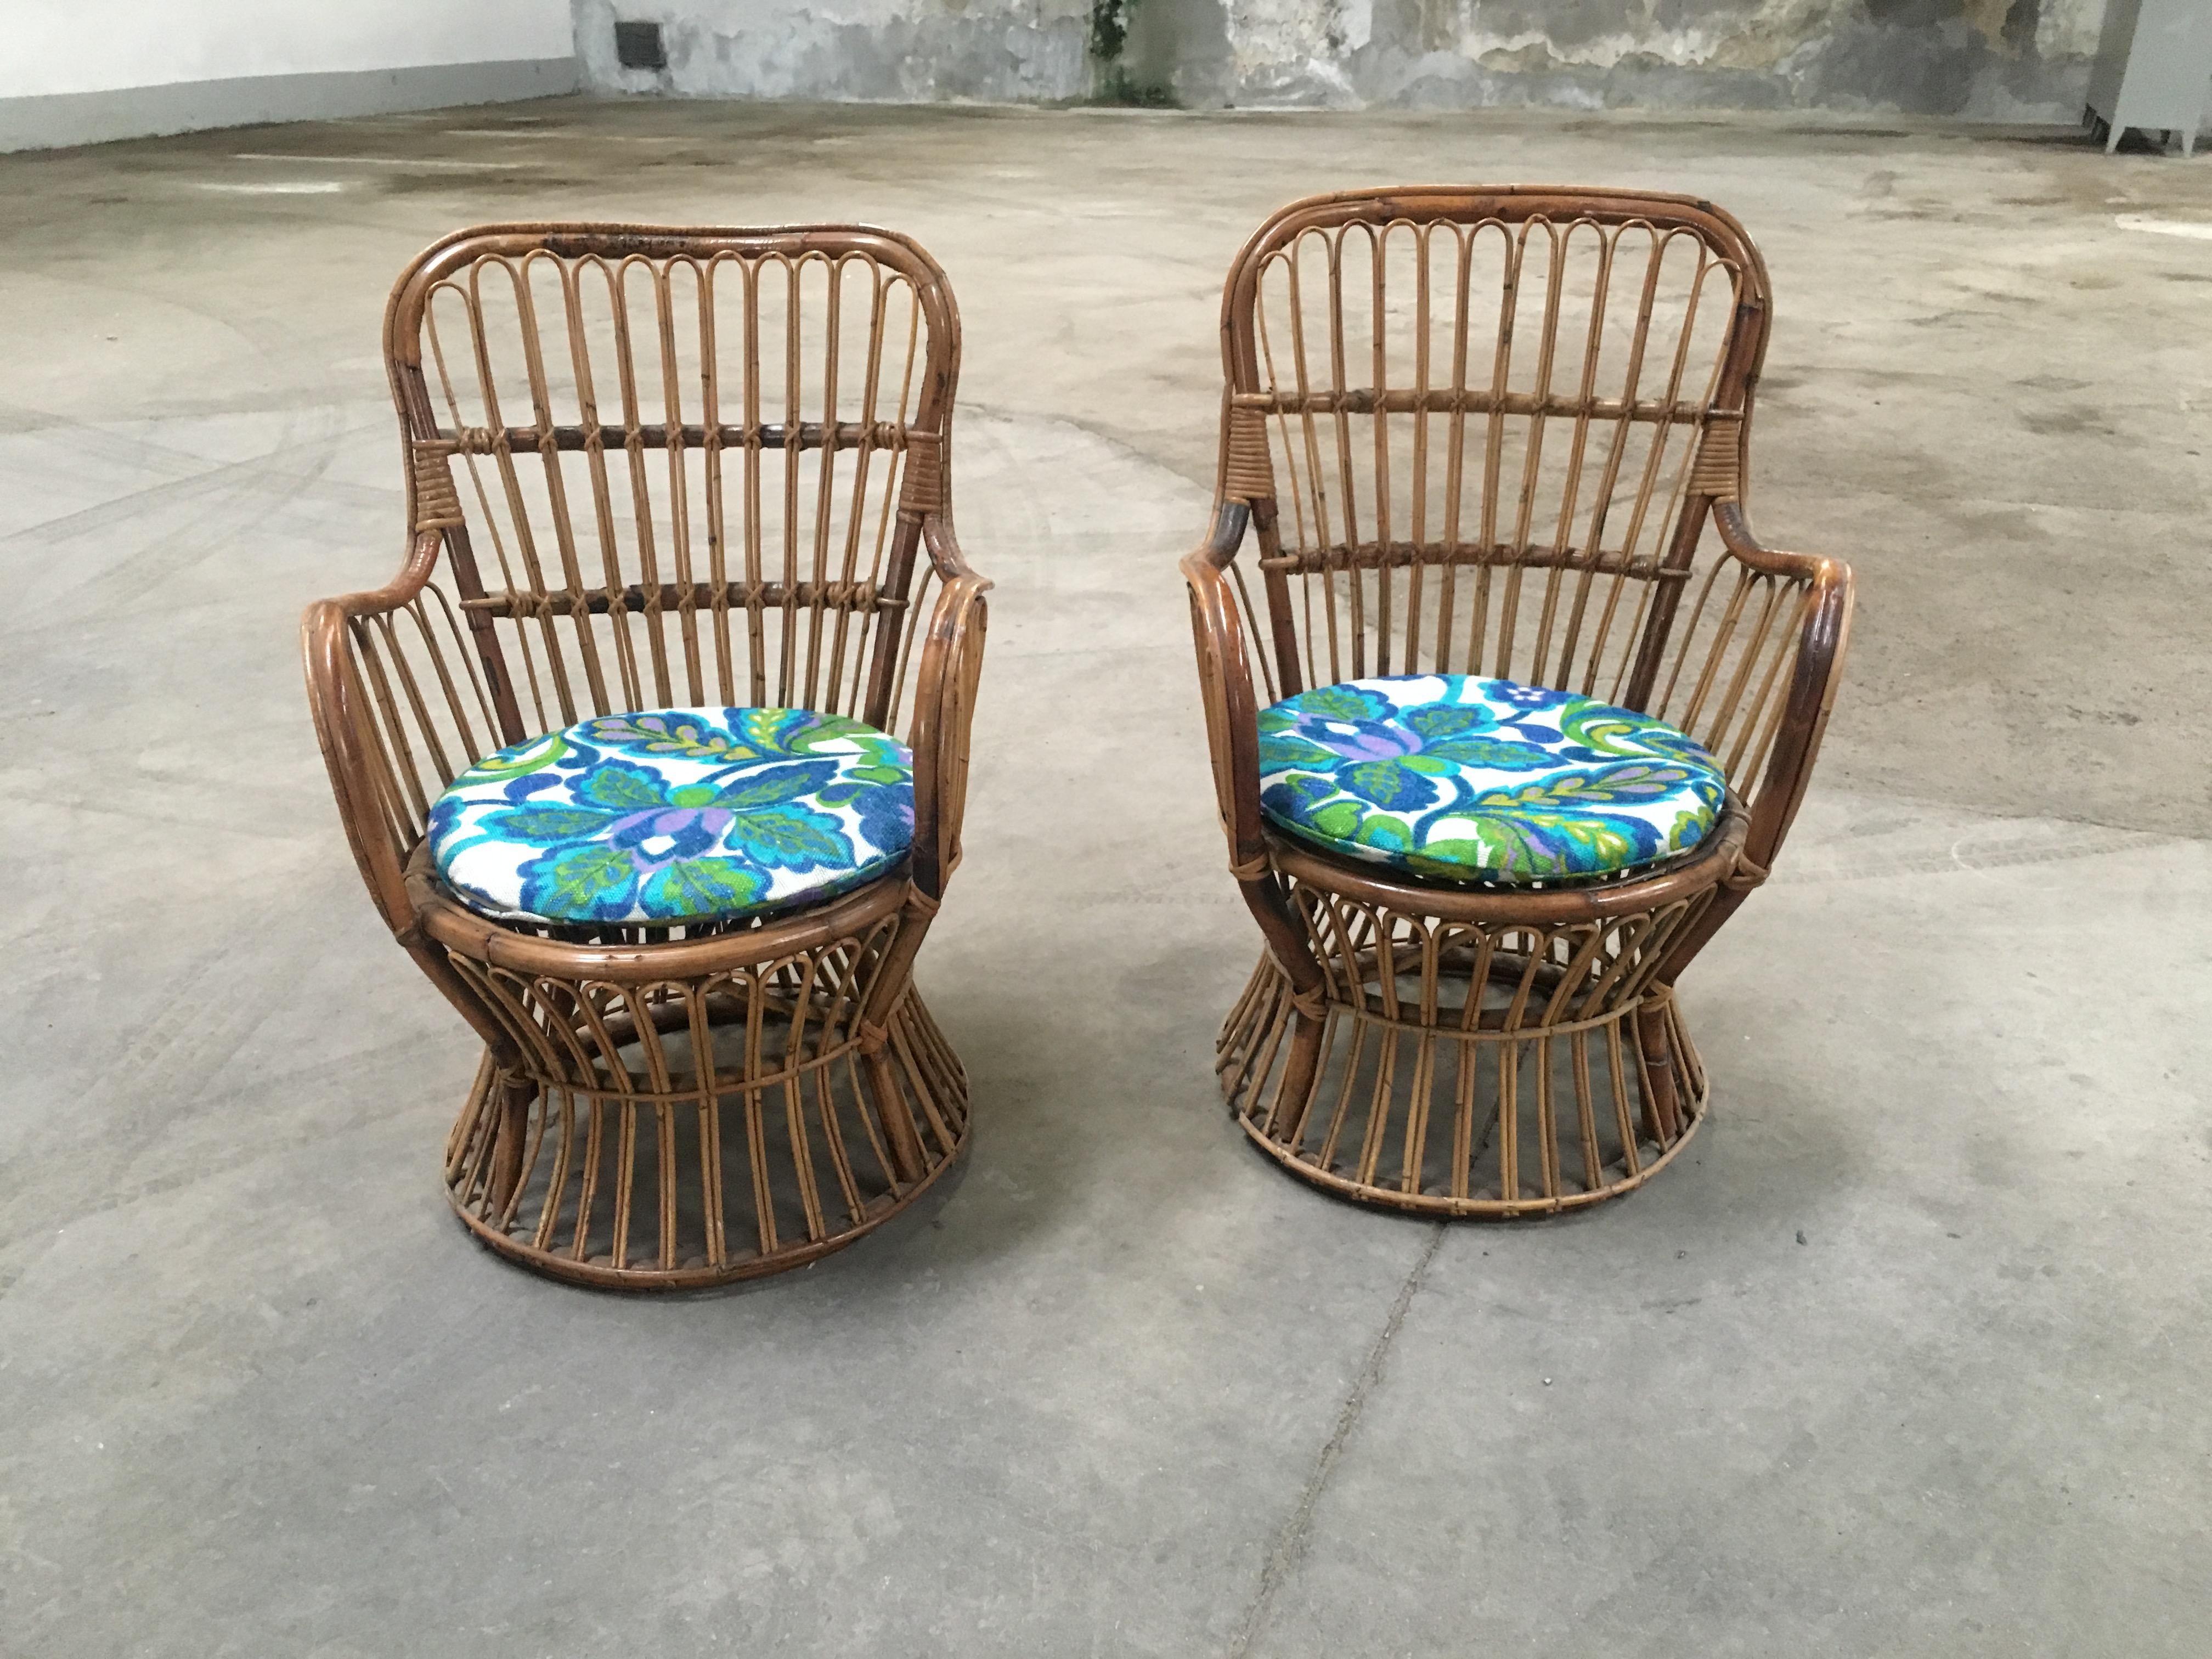 Mid-Century Modern Italian pair of bamboo and rattan armchairs by Bonacina.
The set can be completed with a side table as shown in the photos. Price on request
Fabric cushions are not included. 

